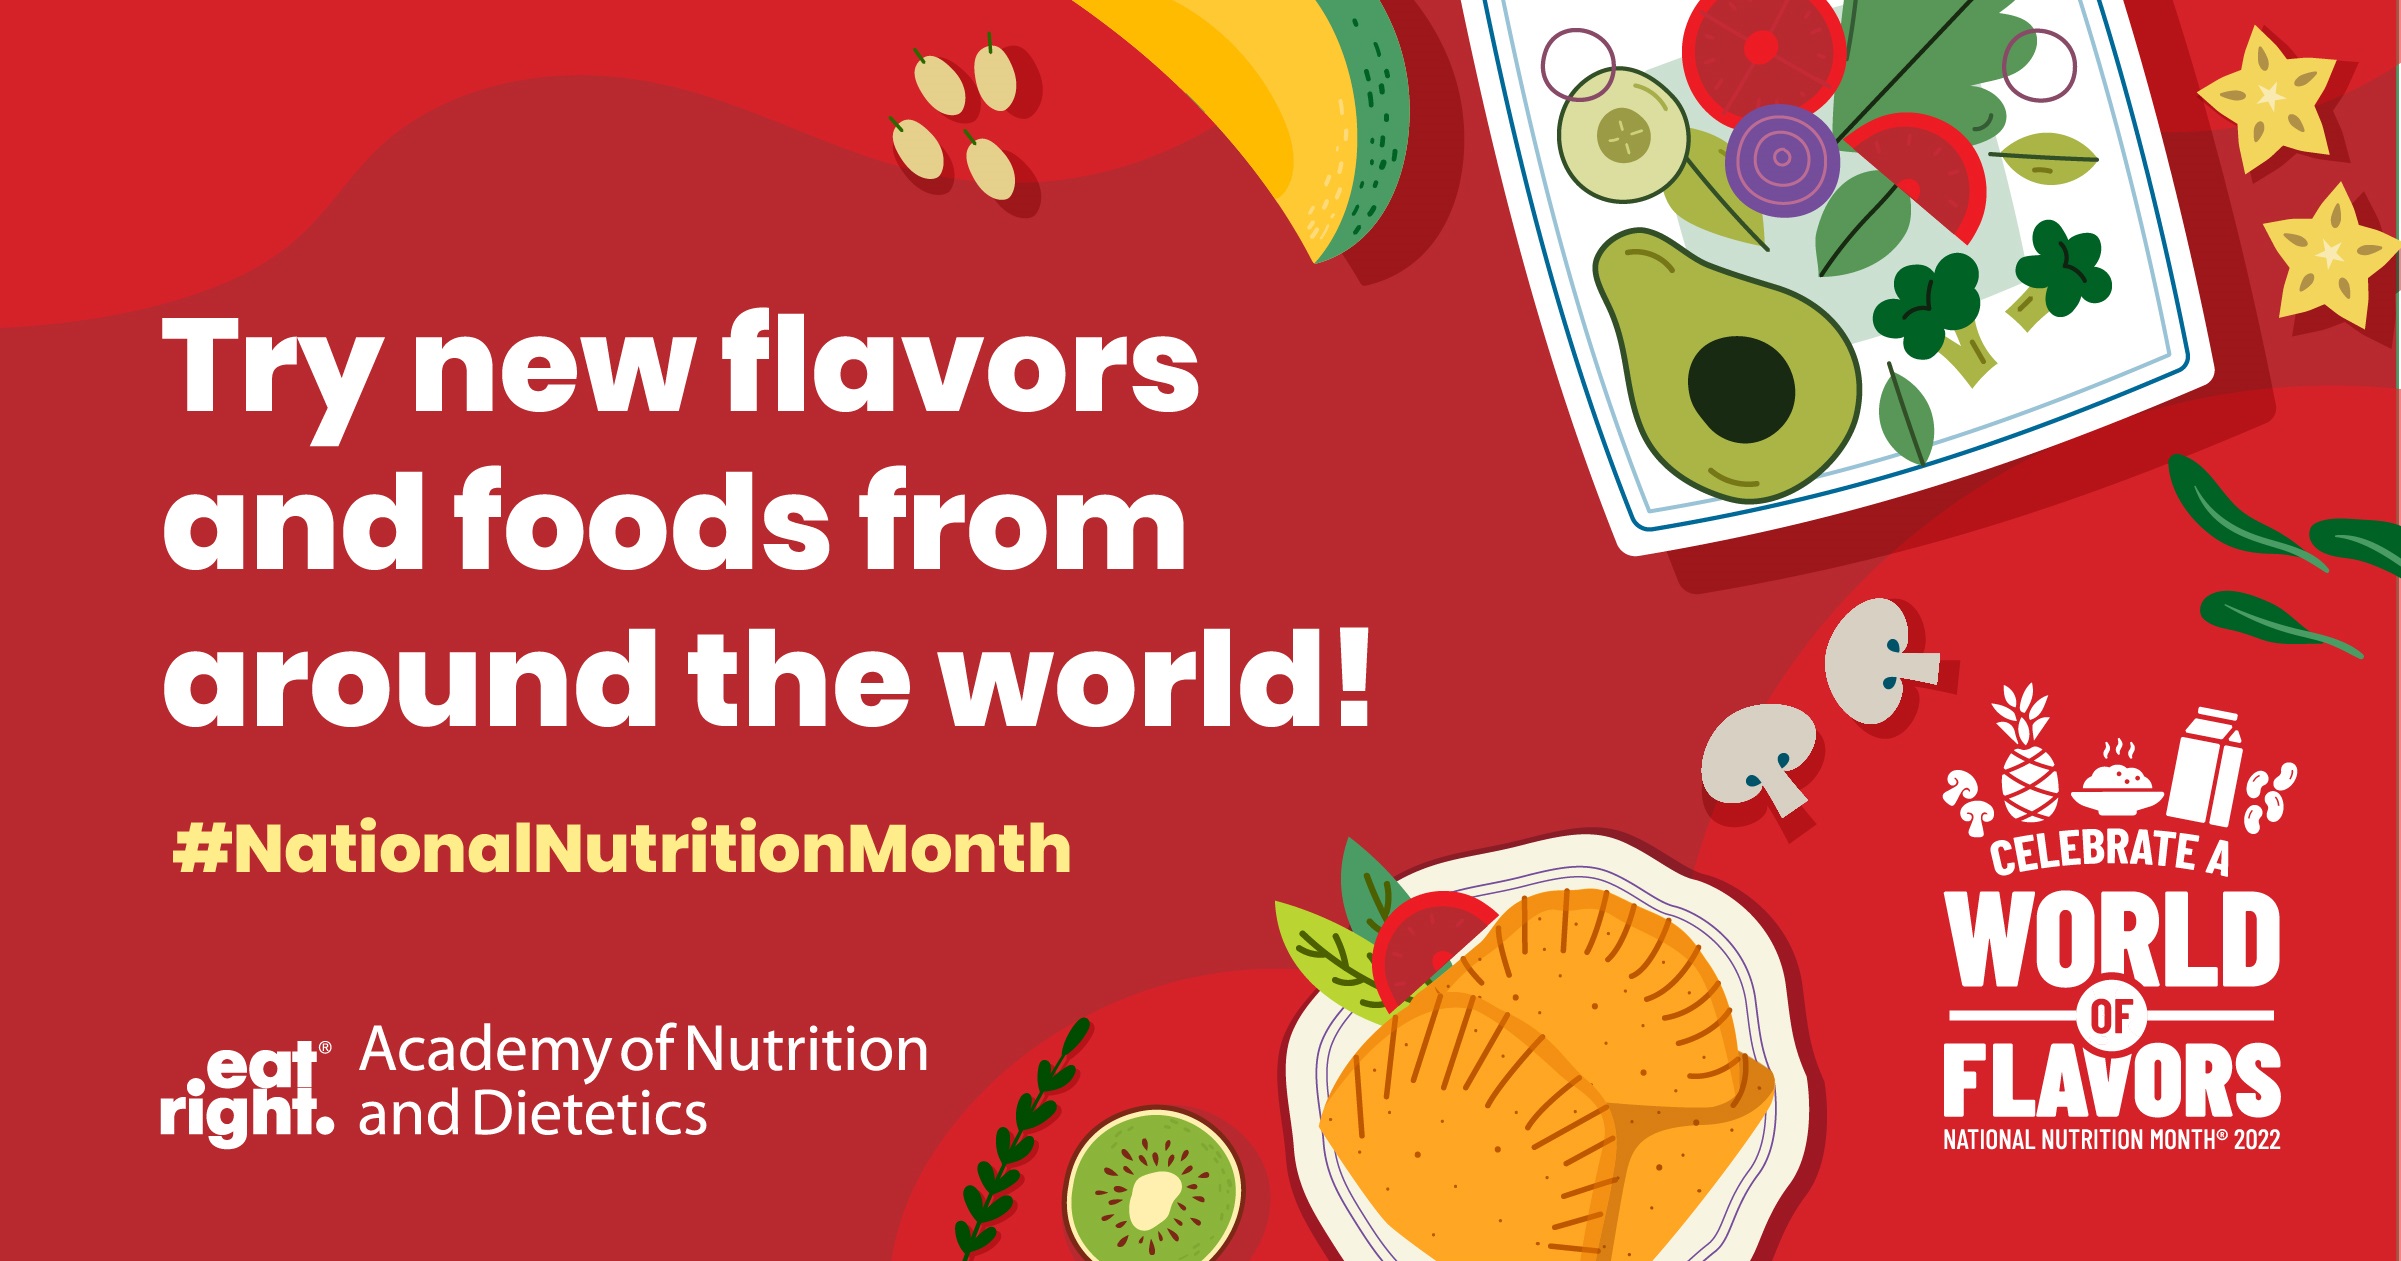 National Nutrition Month Graphics: Try new flavors and foods from around the world